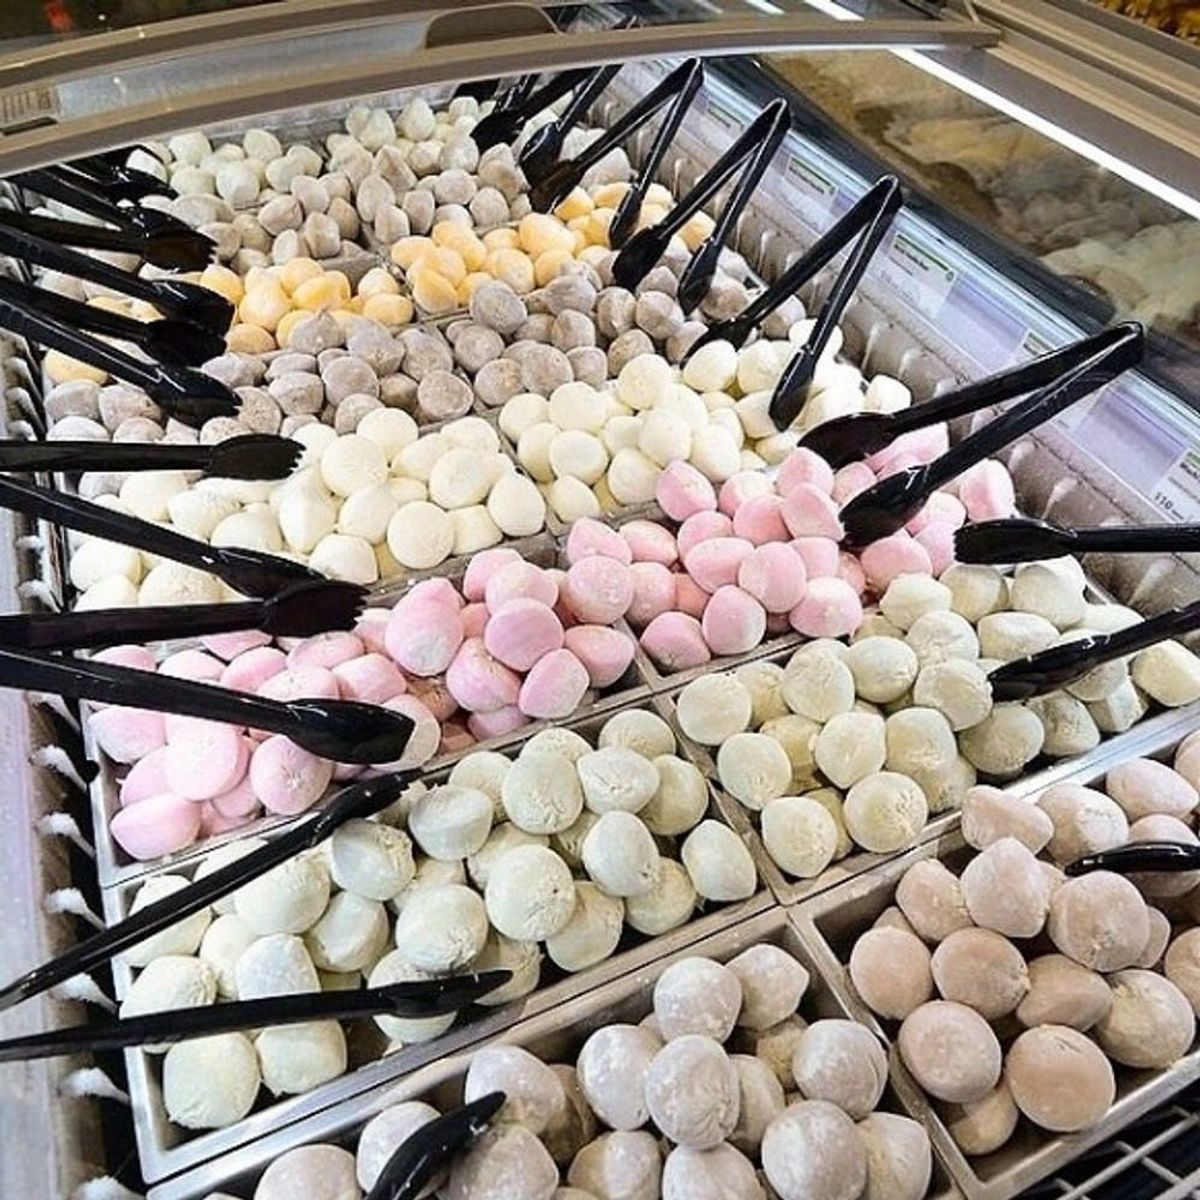 Get Ready: Mochi Ice Cream Is Coming to Whole Foods